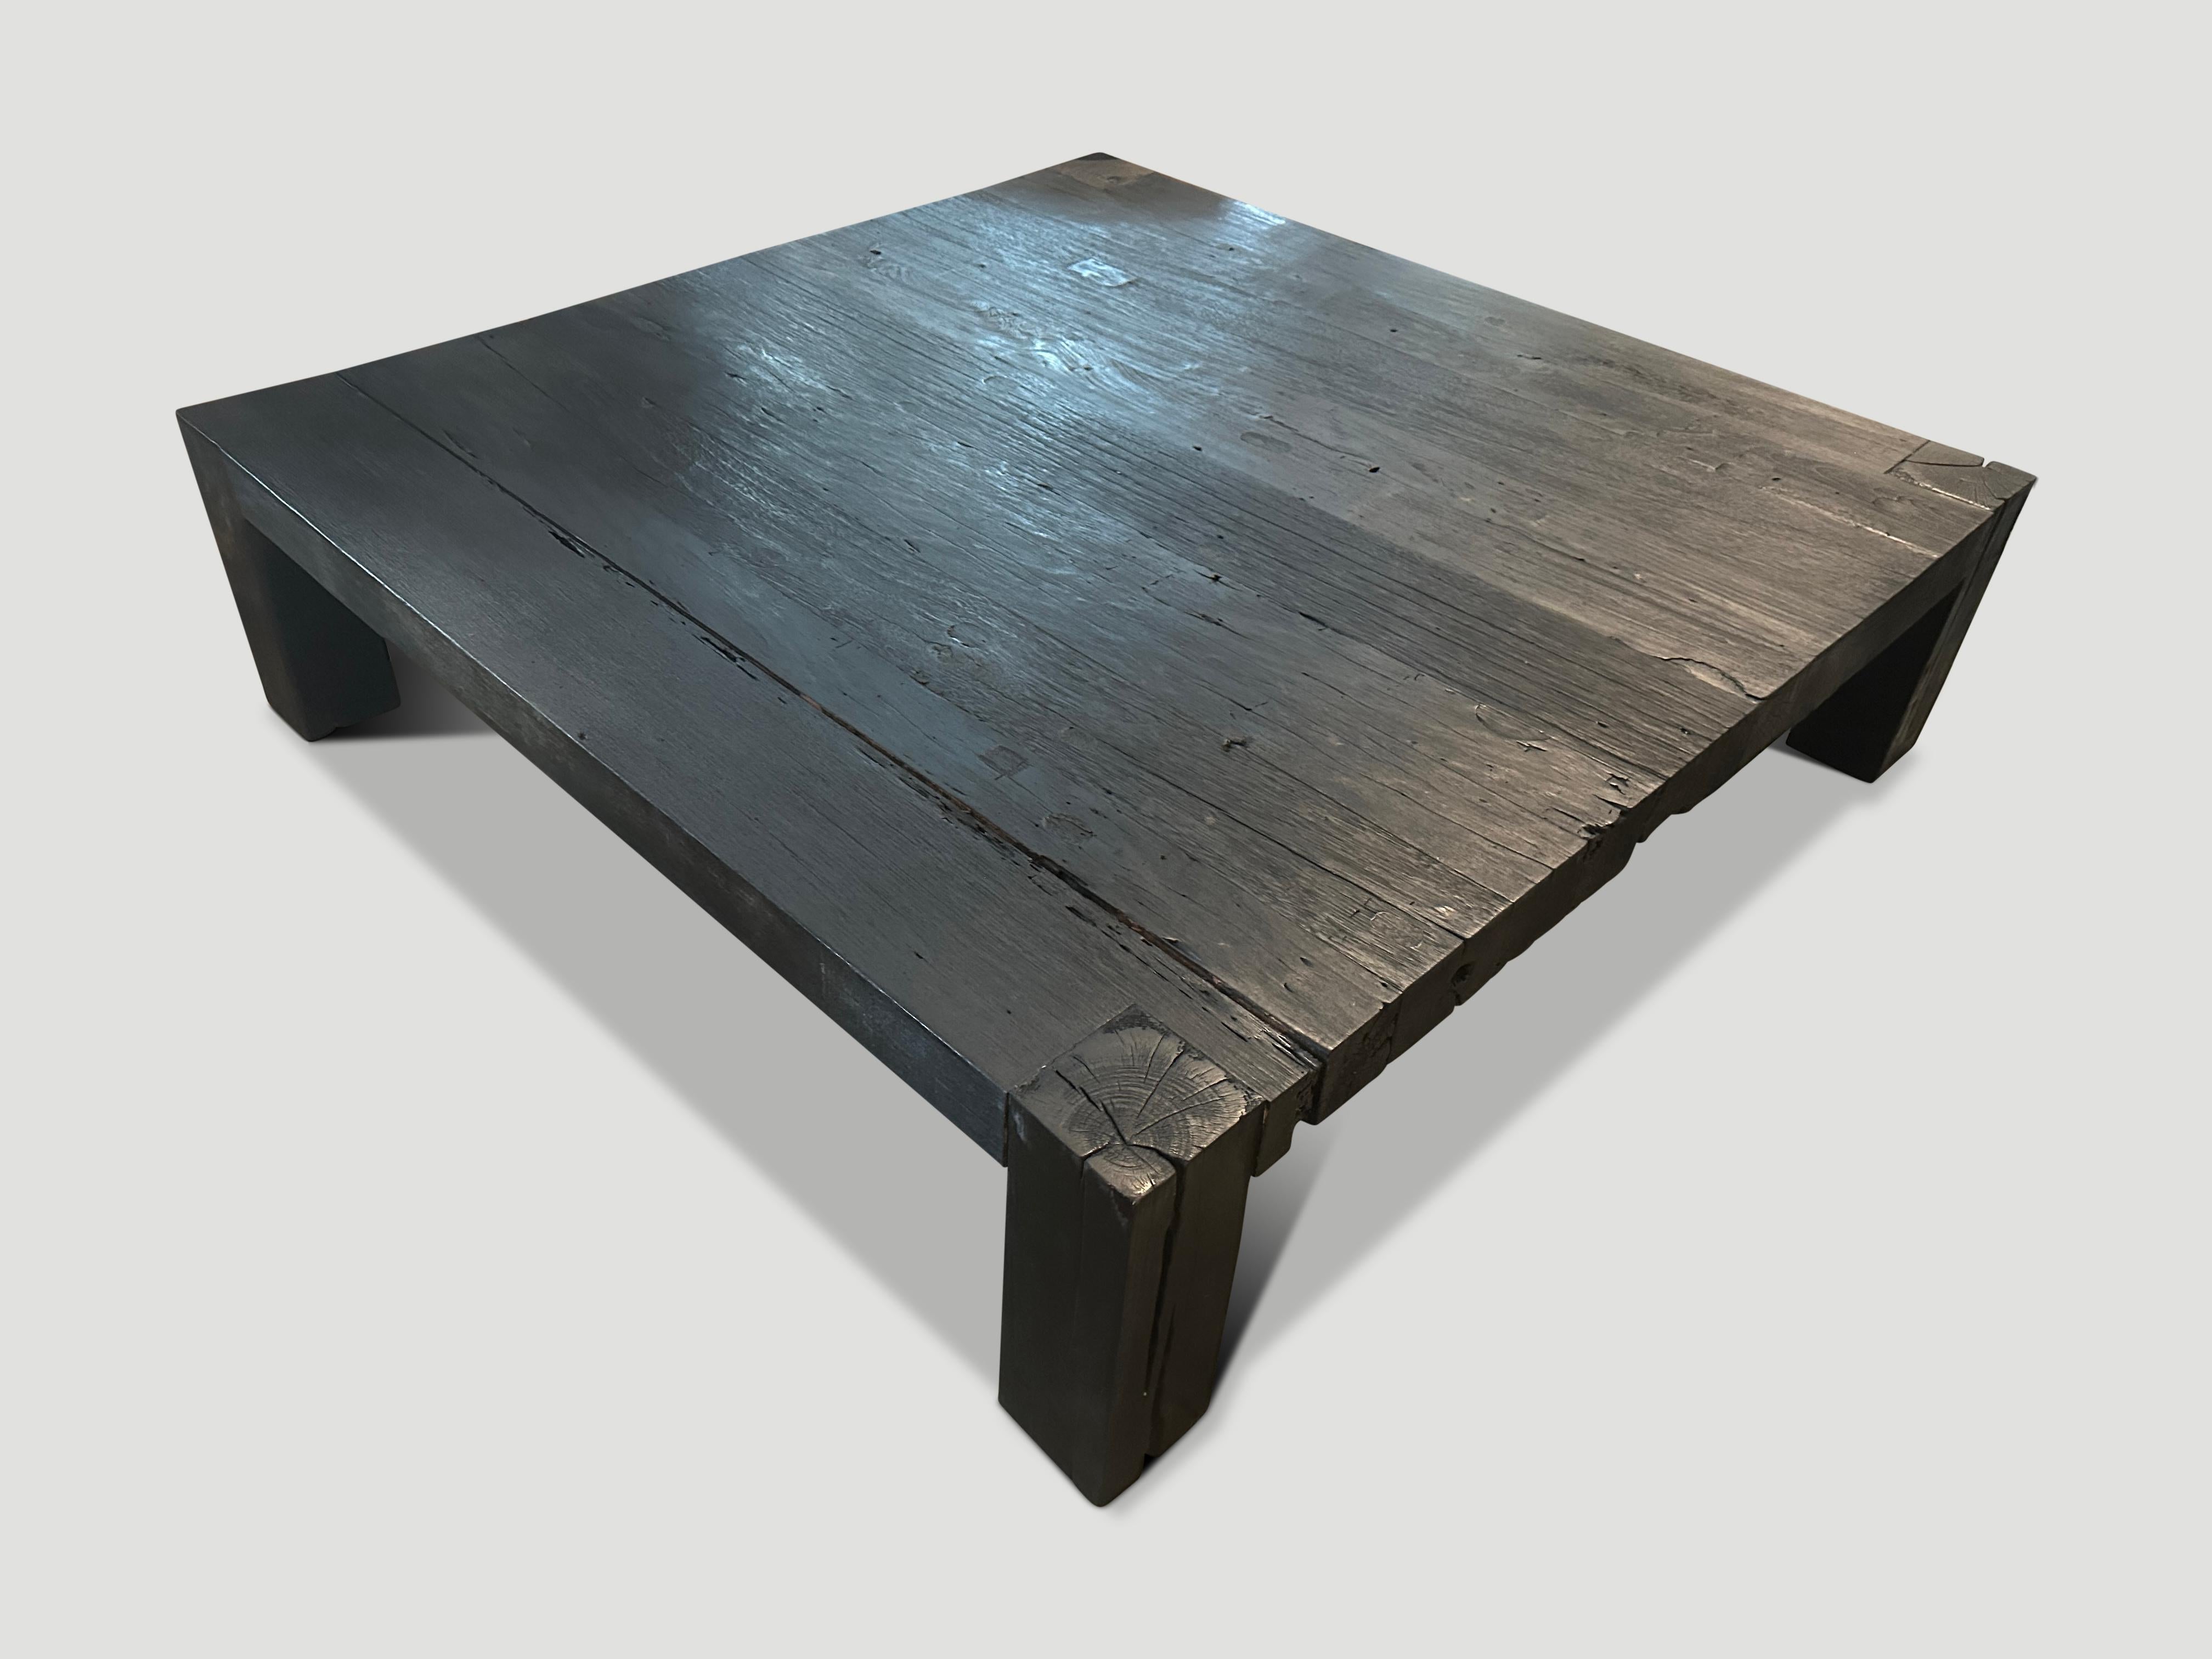 Over sized reclaimed meranti wood coffee table. The solid block legs are 5